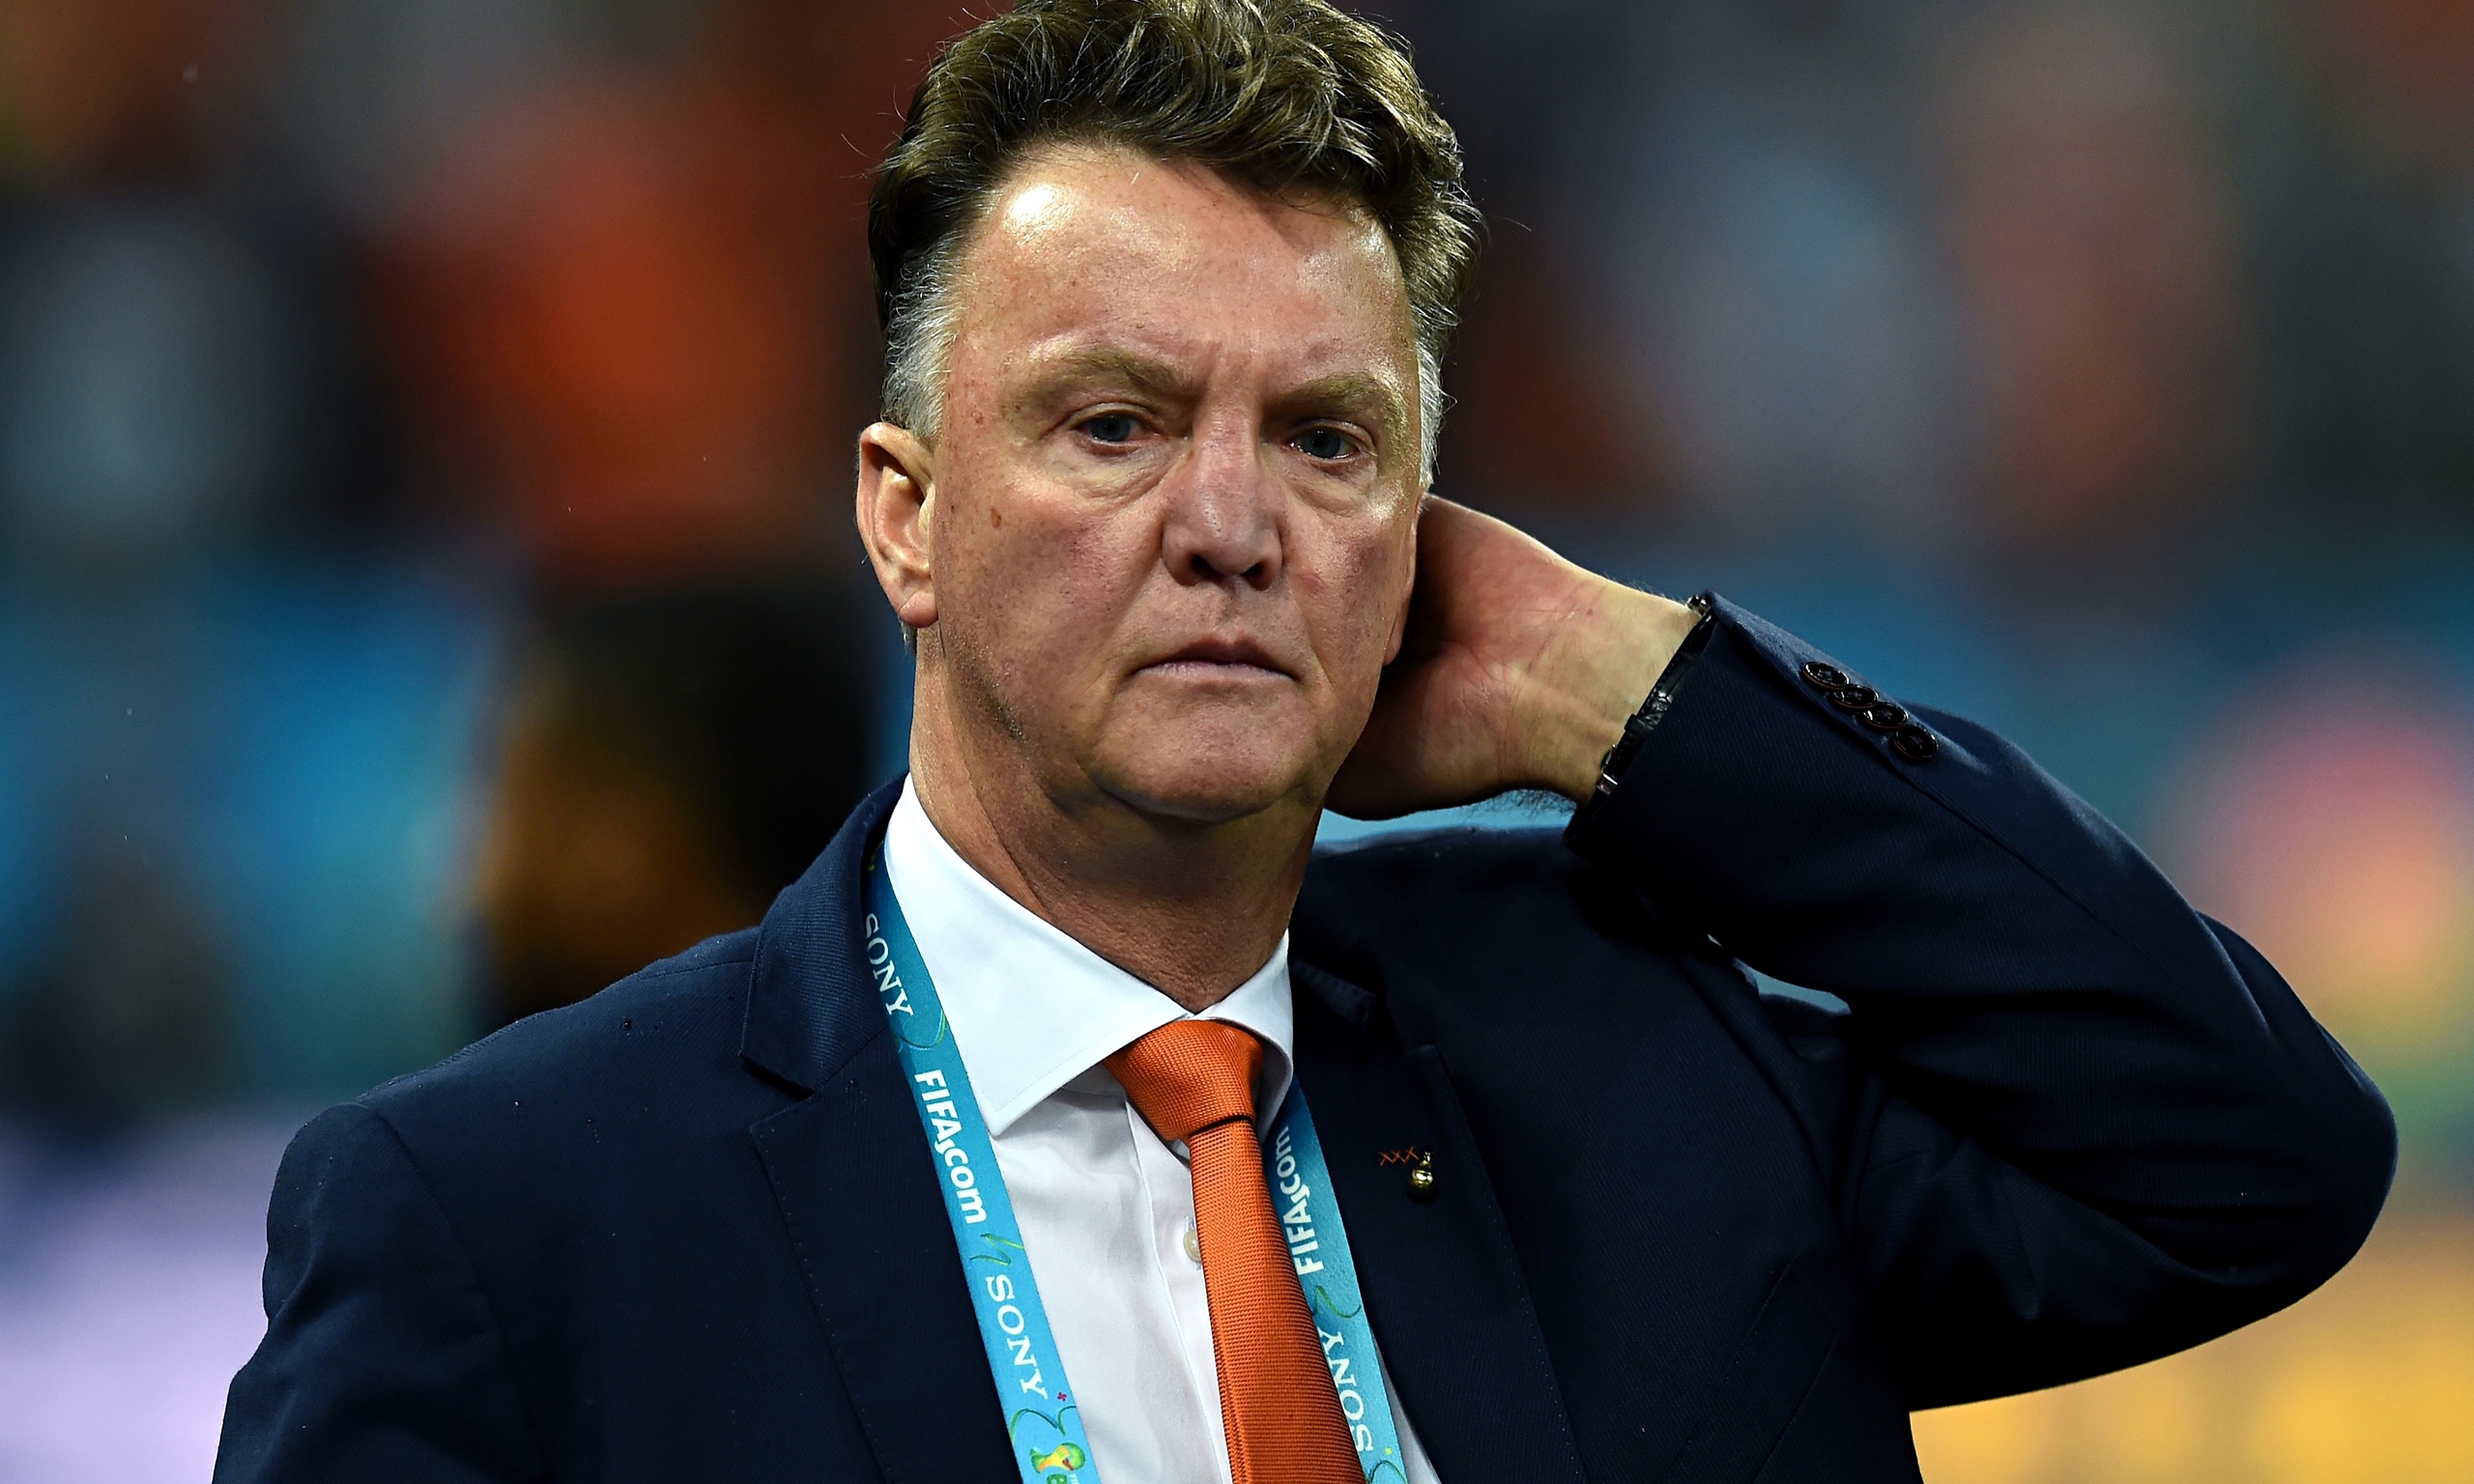 Louis van Gaal to officially join Manchester United after Holland exit